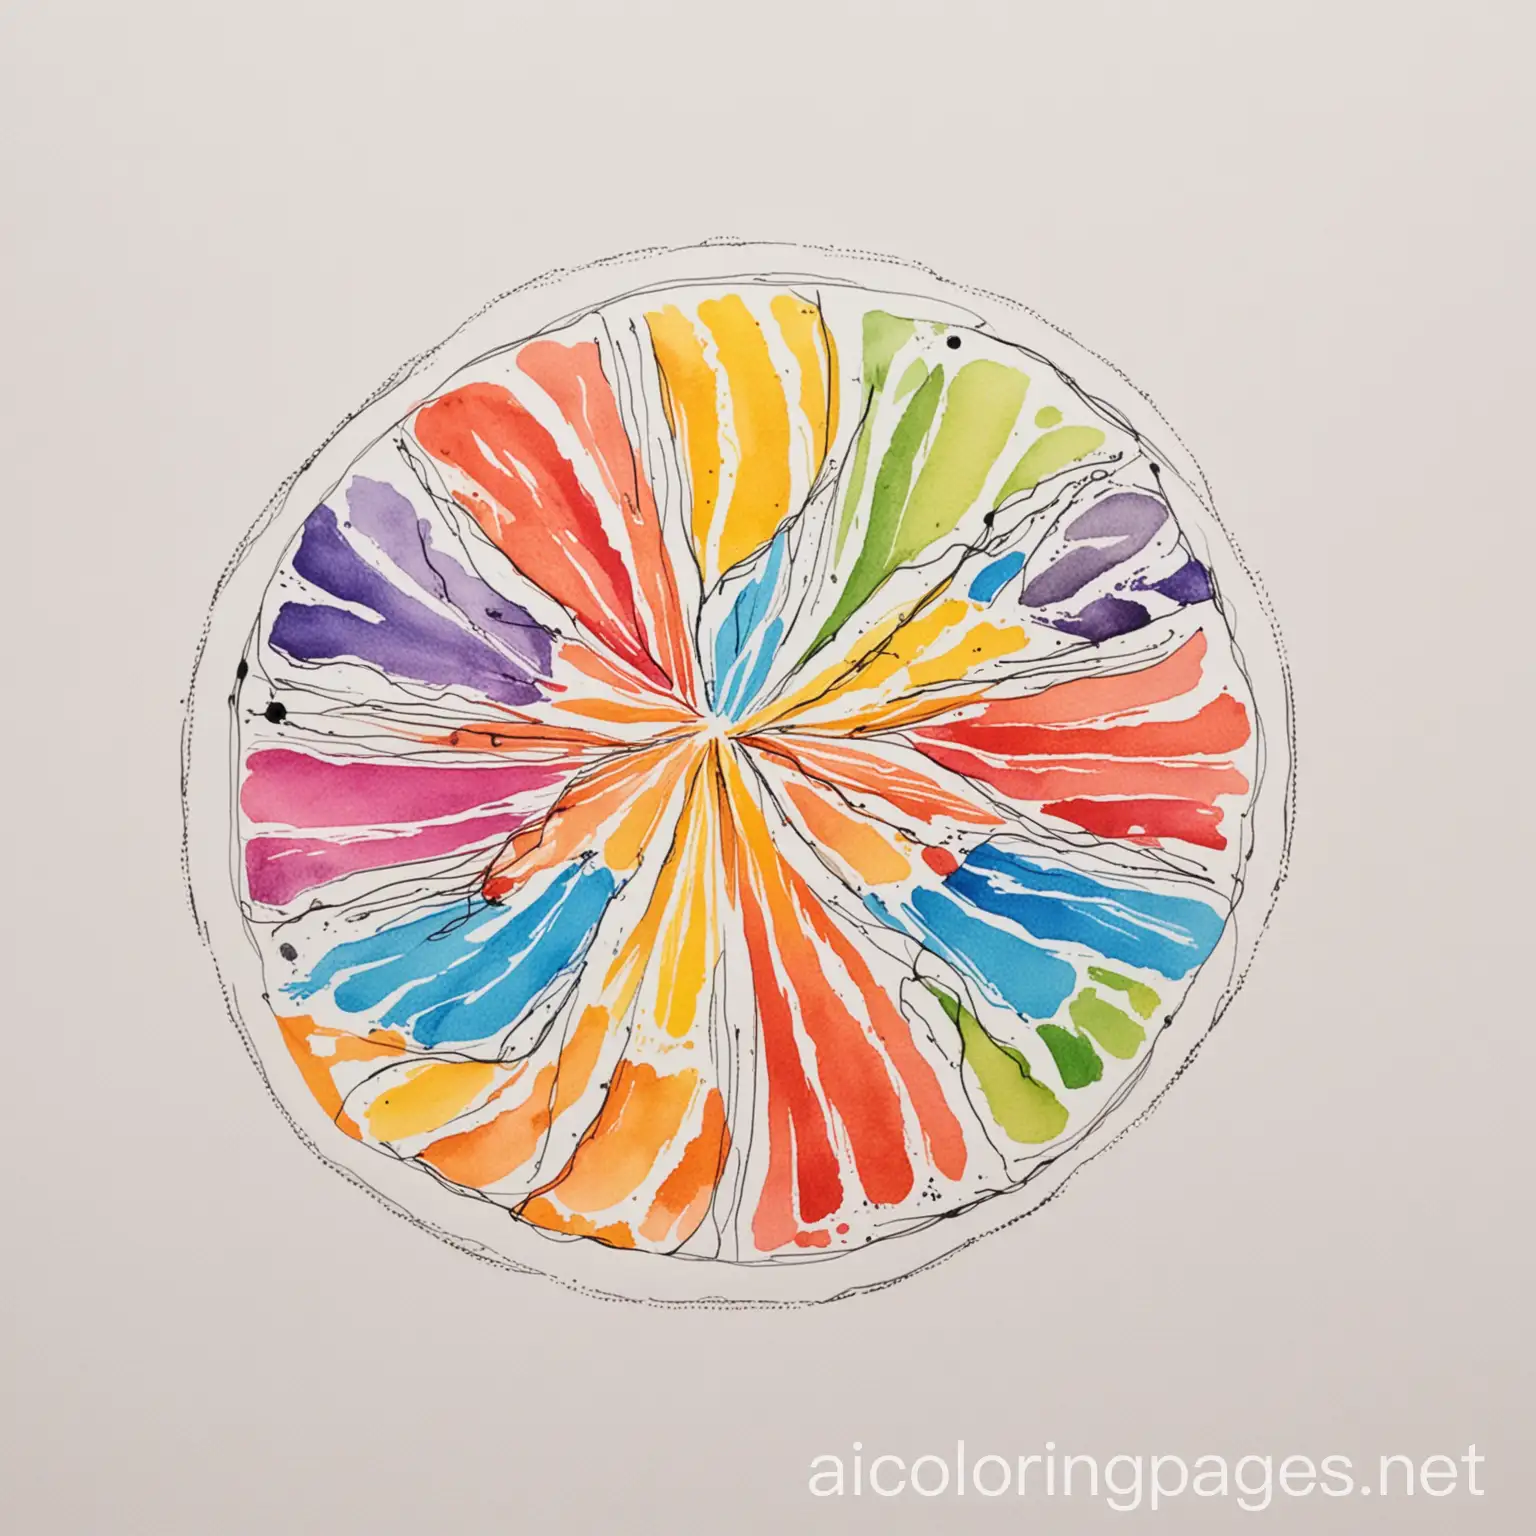 Coloring-Page-Vibrant-Rainbow-Palette-on-White-Background